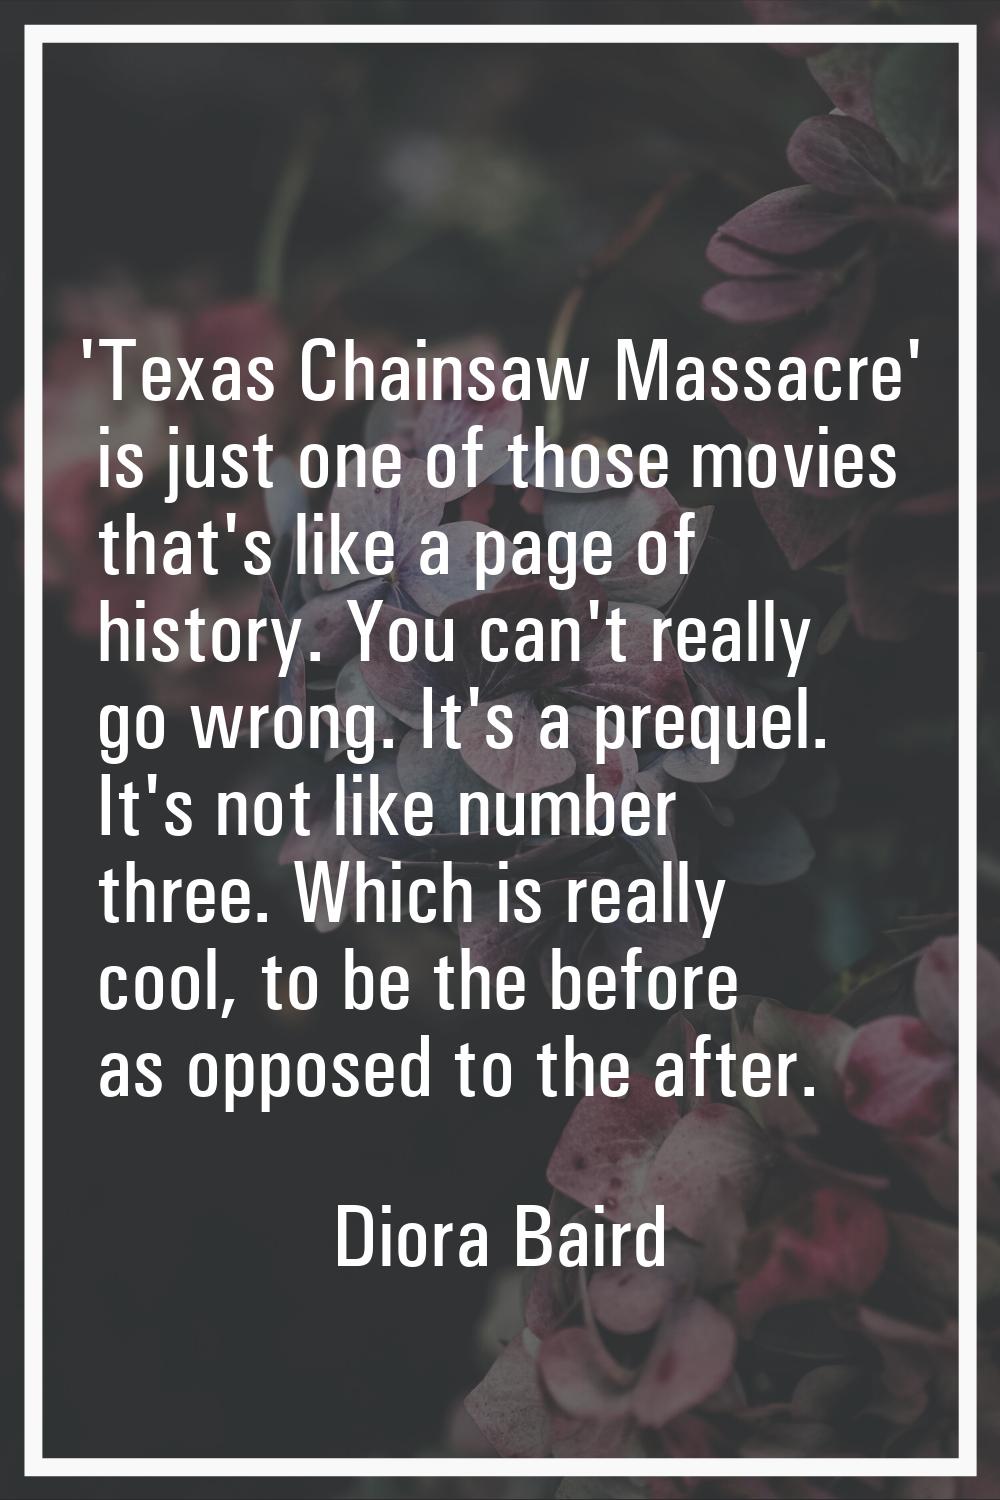 'Texas Chainsaw Massacre' is just one of those movies that's like a page of history. You can't real